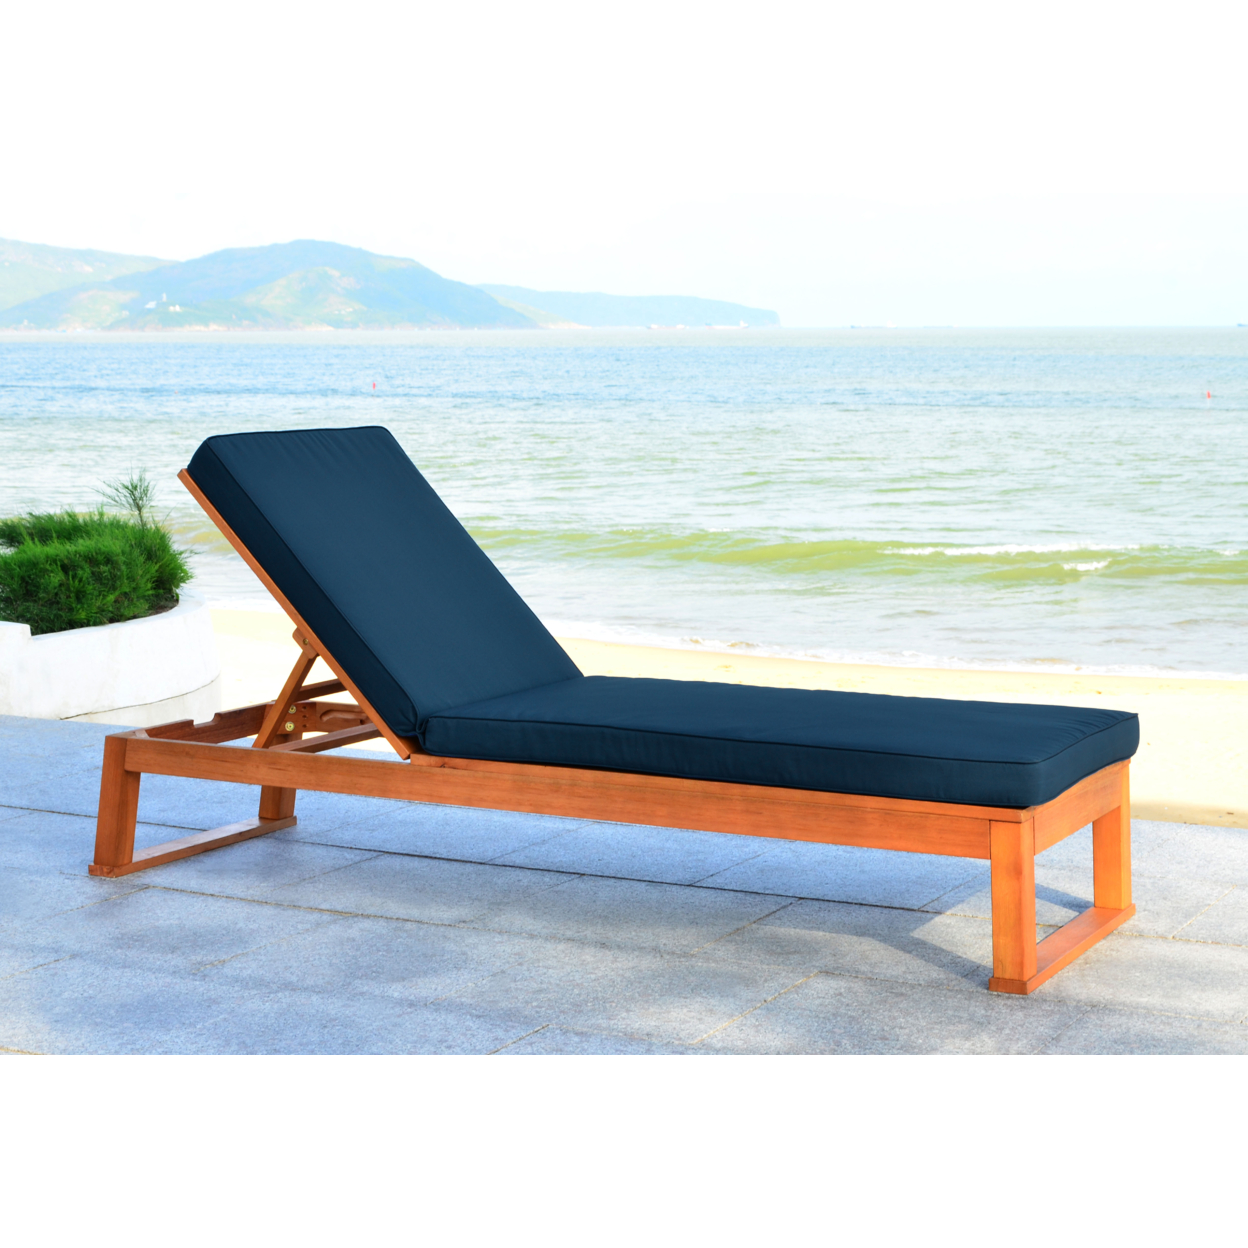 SAFAVIEH Outdoor Collection Solano Chaise Sunlounger Natural/Navy